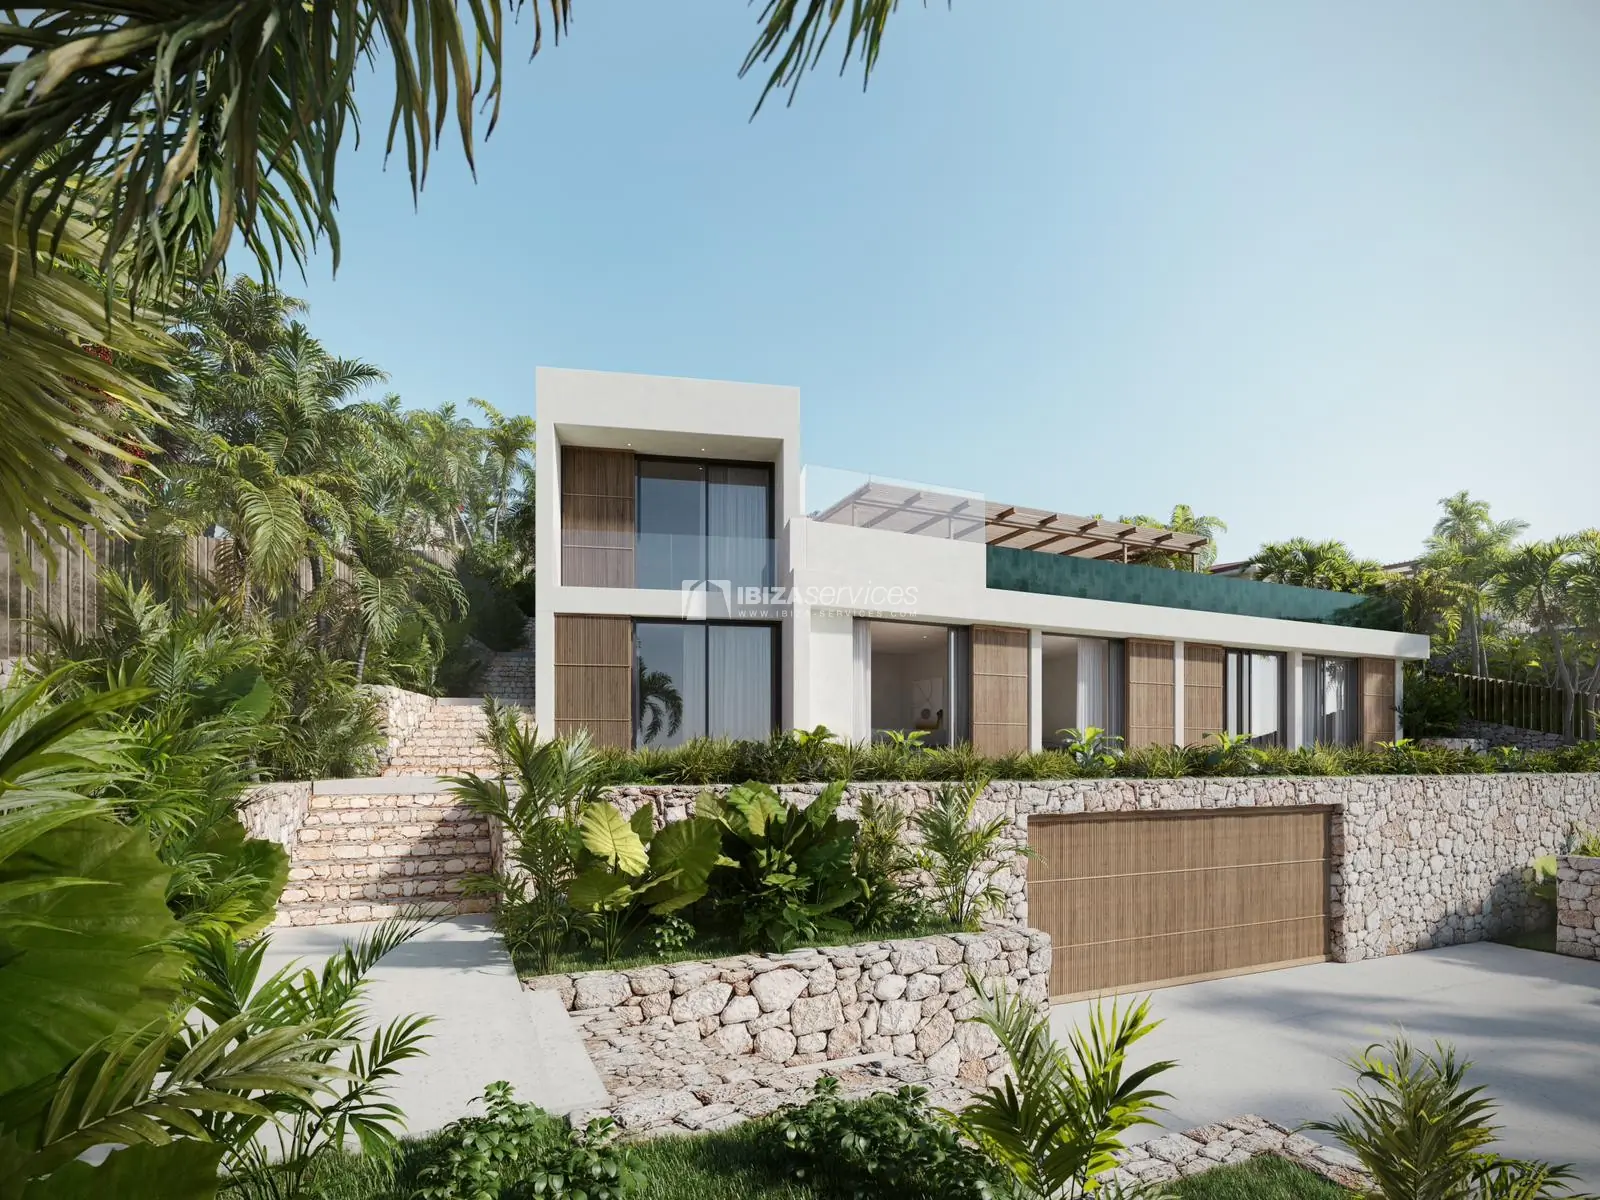 Two luxurious newly built villas for sale in Cap Martinet